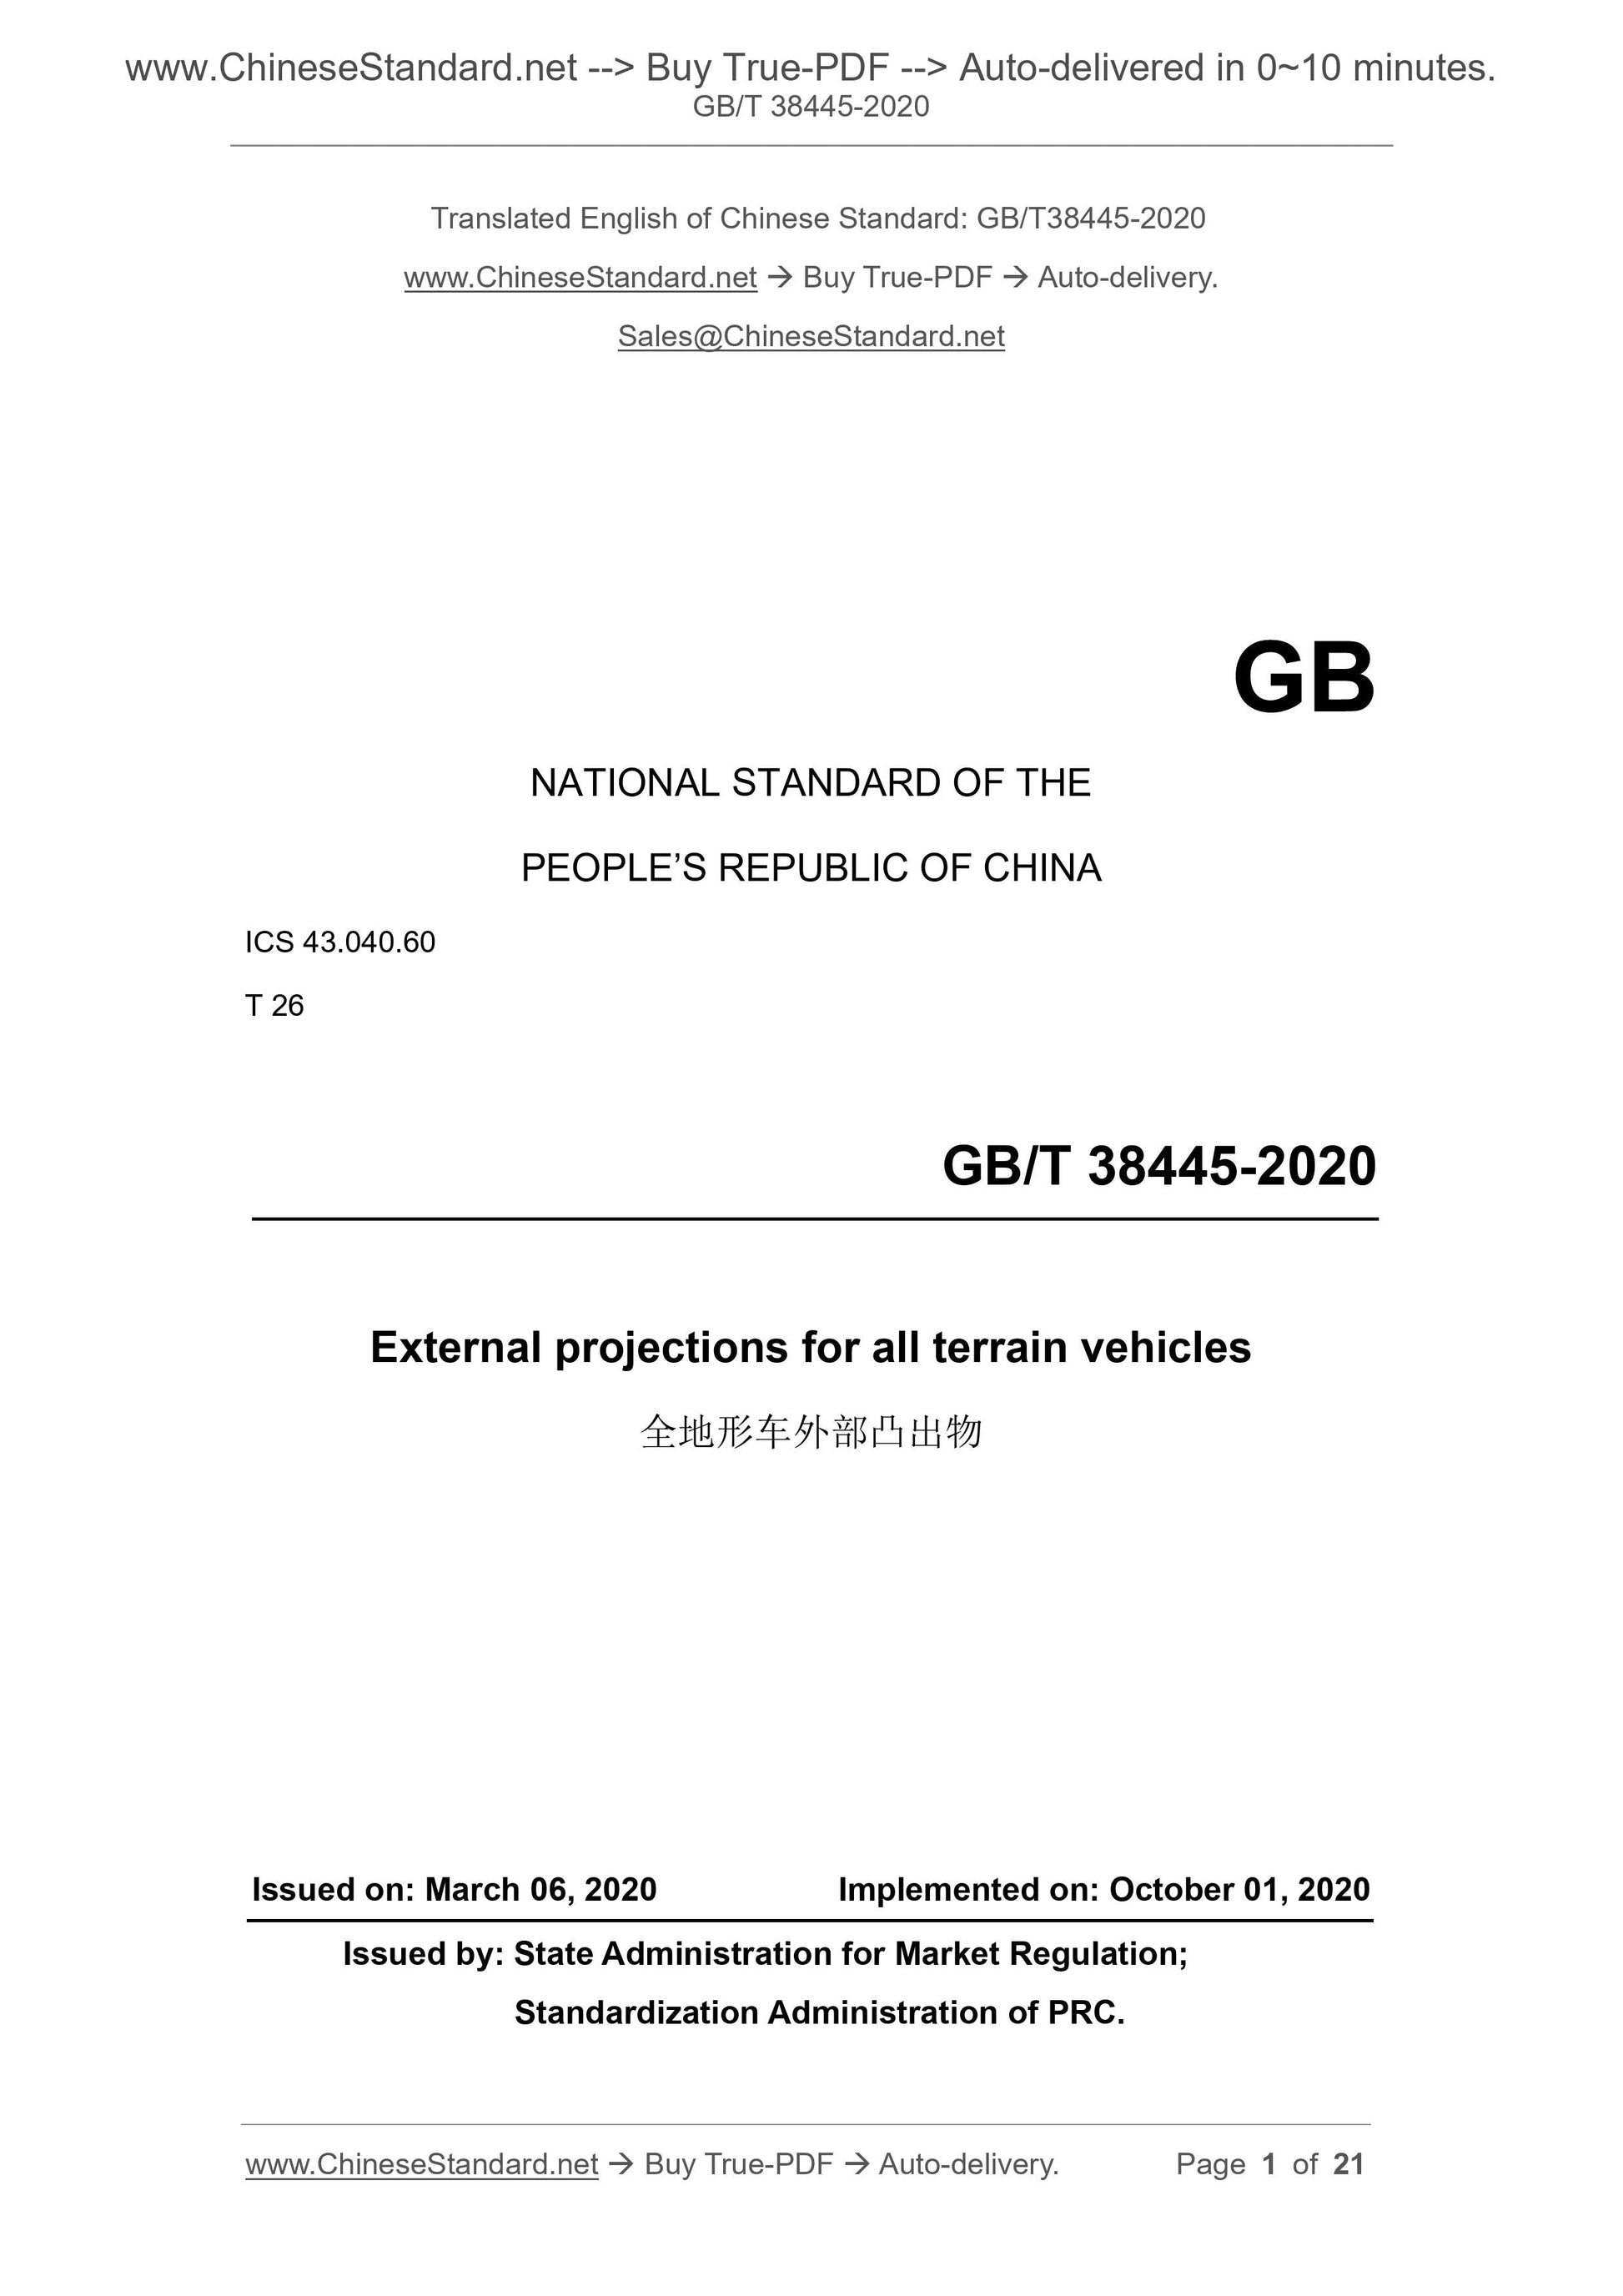 GB/T 38445-2020 Page 1